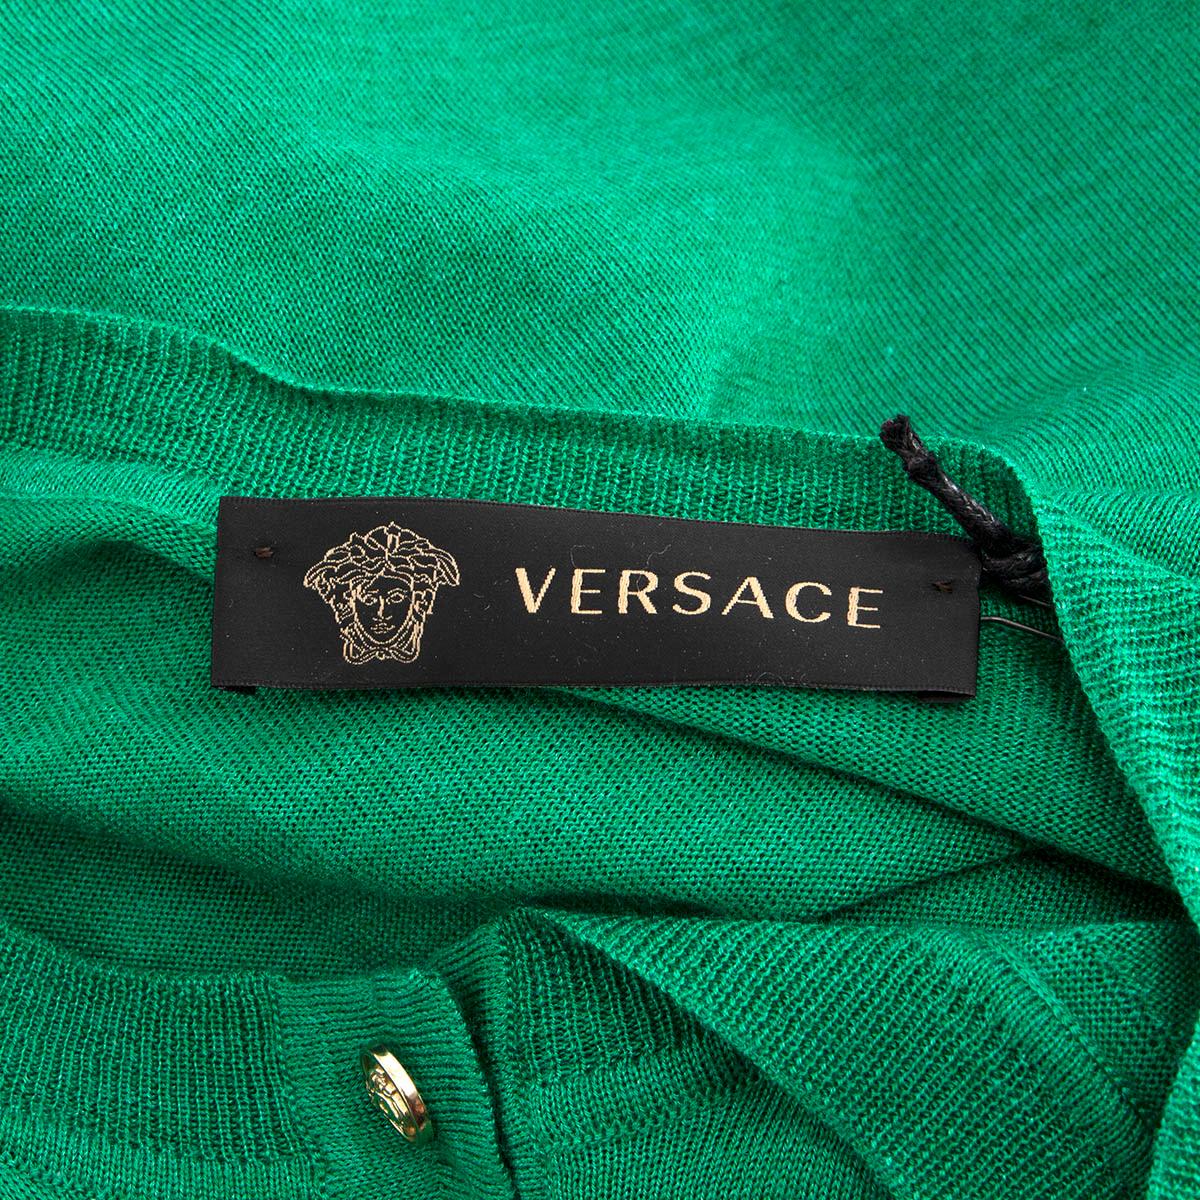 VERSACE green cashmere & silk BUTTON FRONT CREWNECK Cardigan Sweater 44 L In Excellent Condition For Sale In Zürich, CH